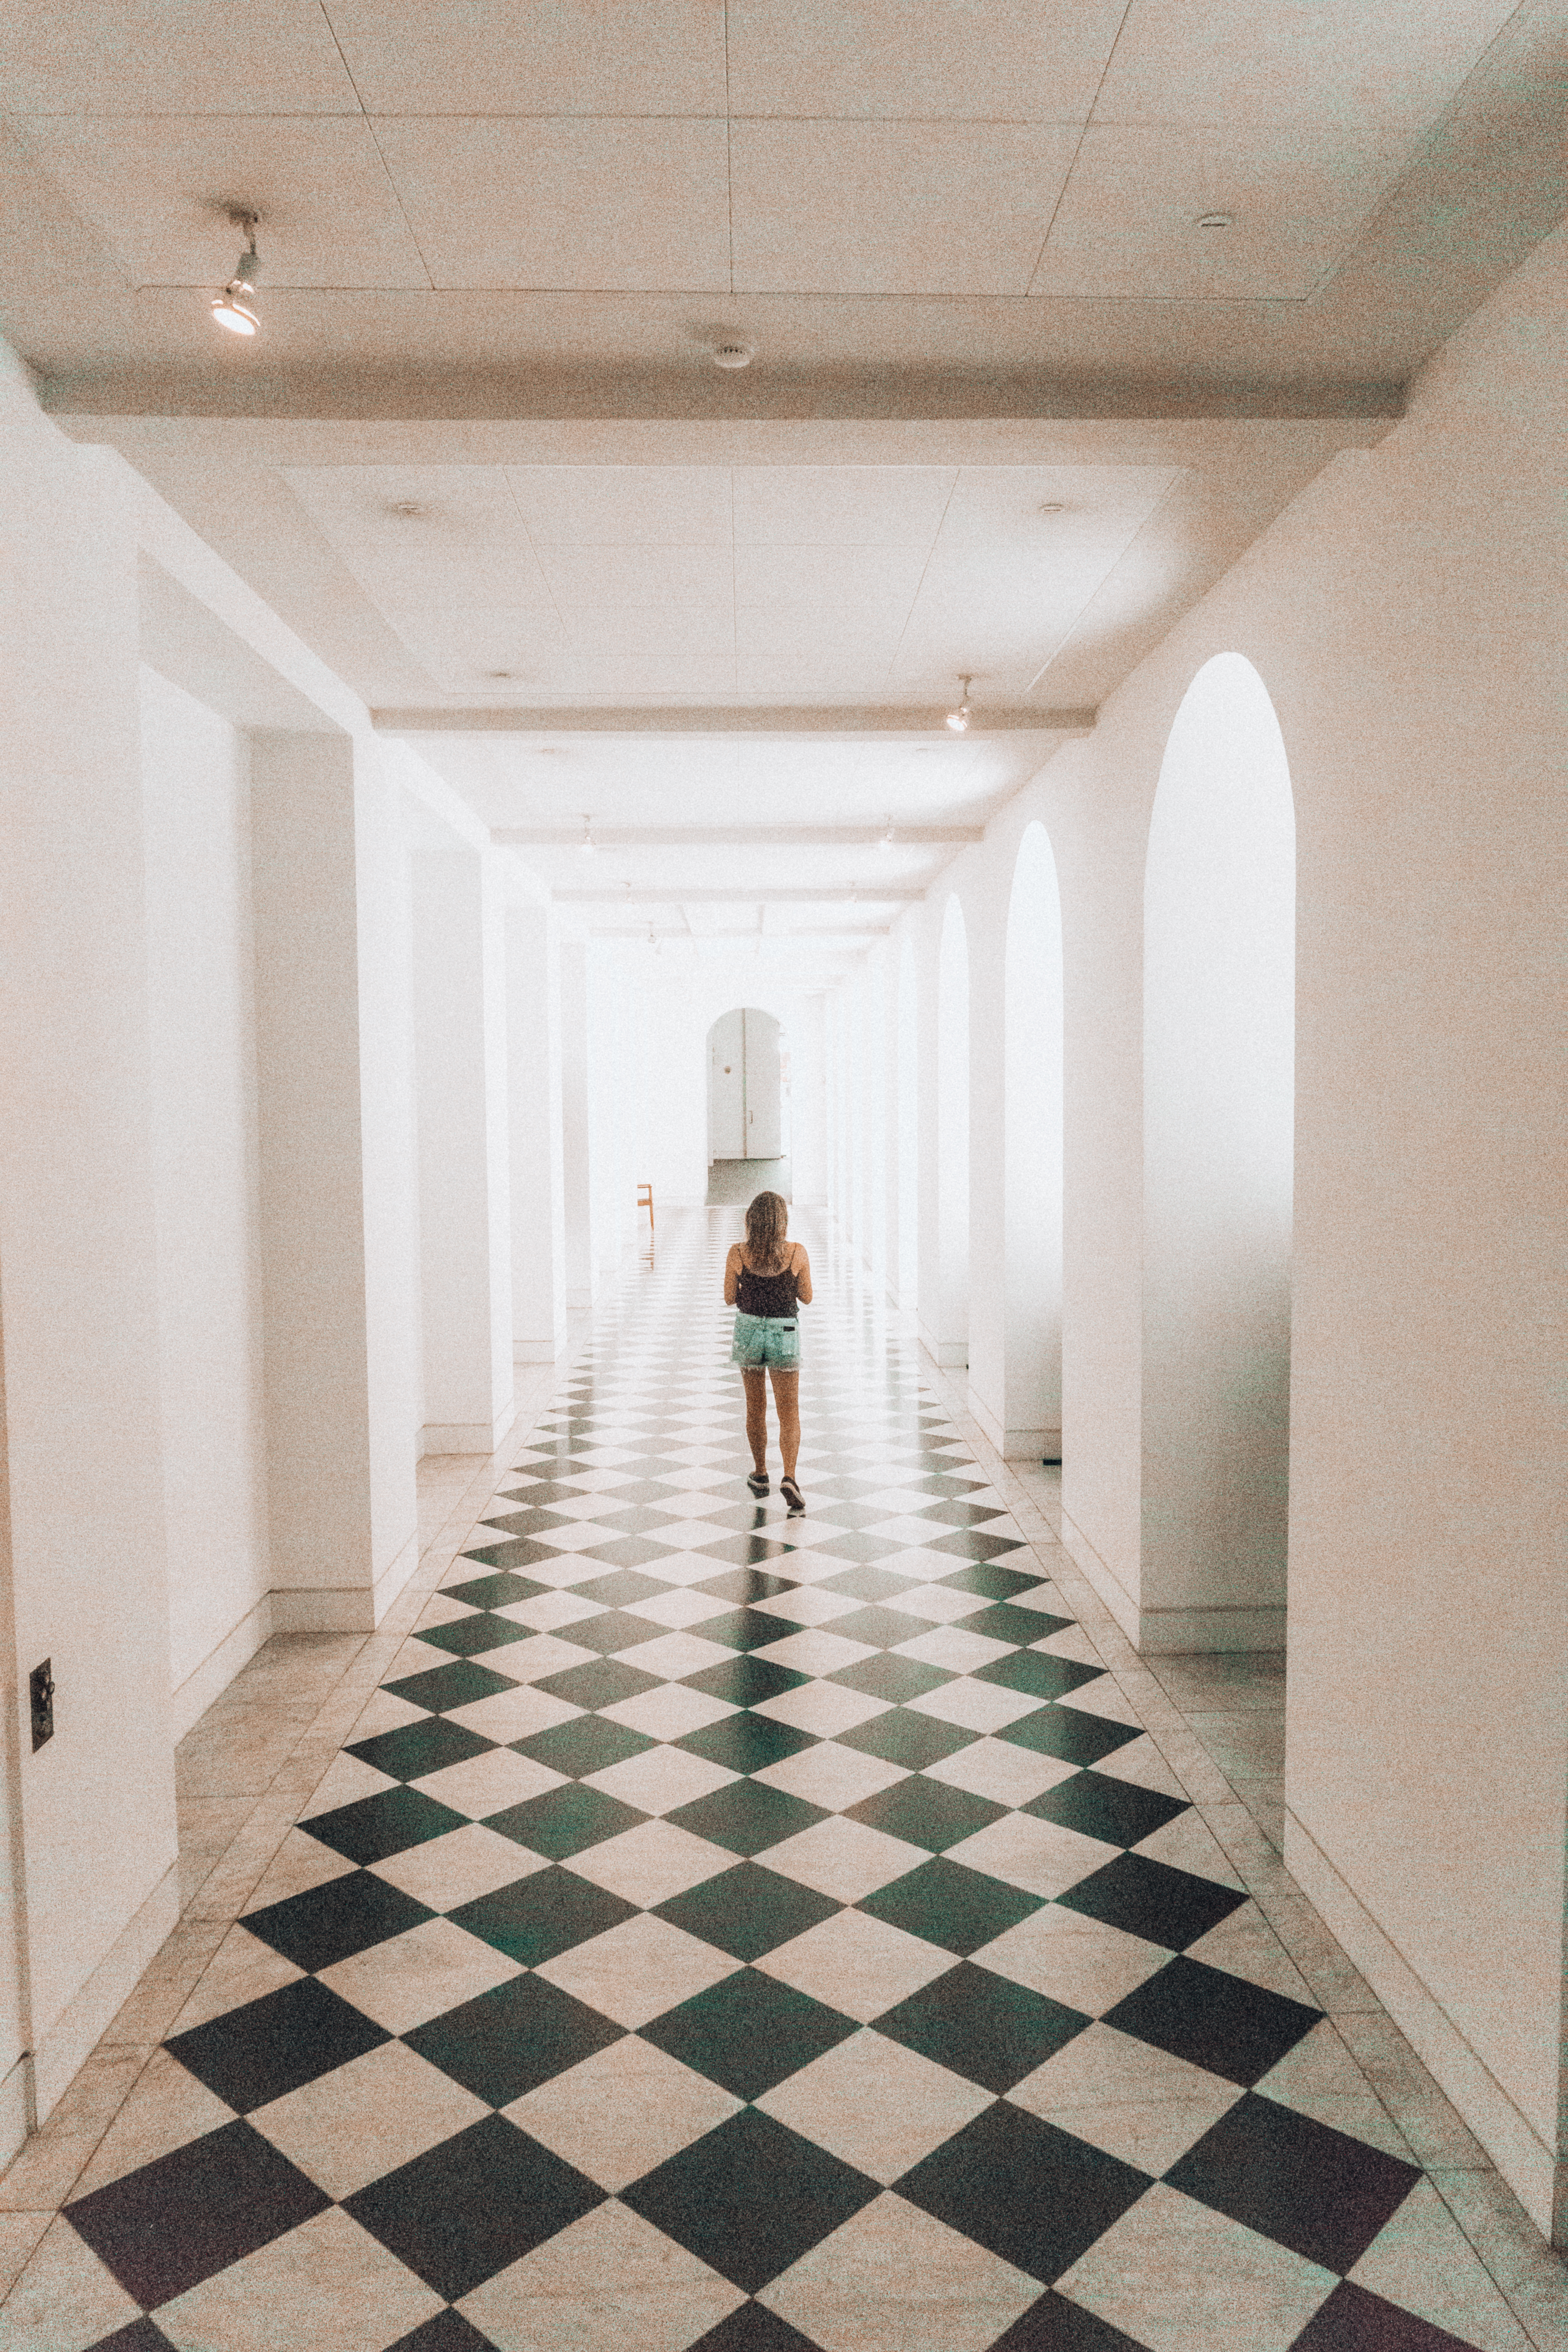 A girl wearing a black top and shorts walks down a long white hallway that has checkered floors and archways